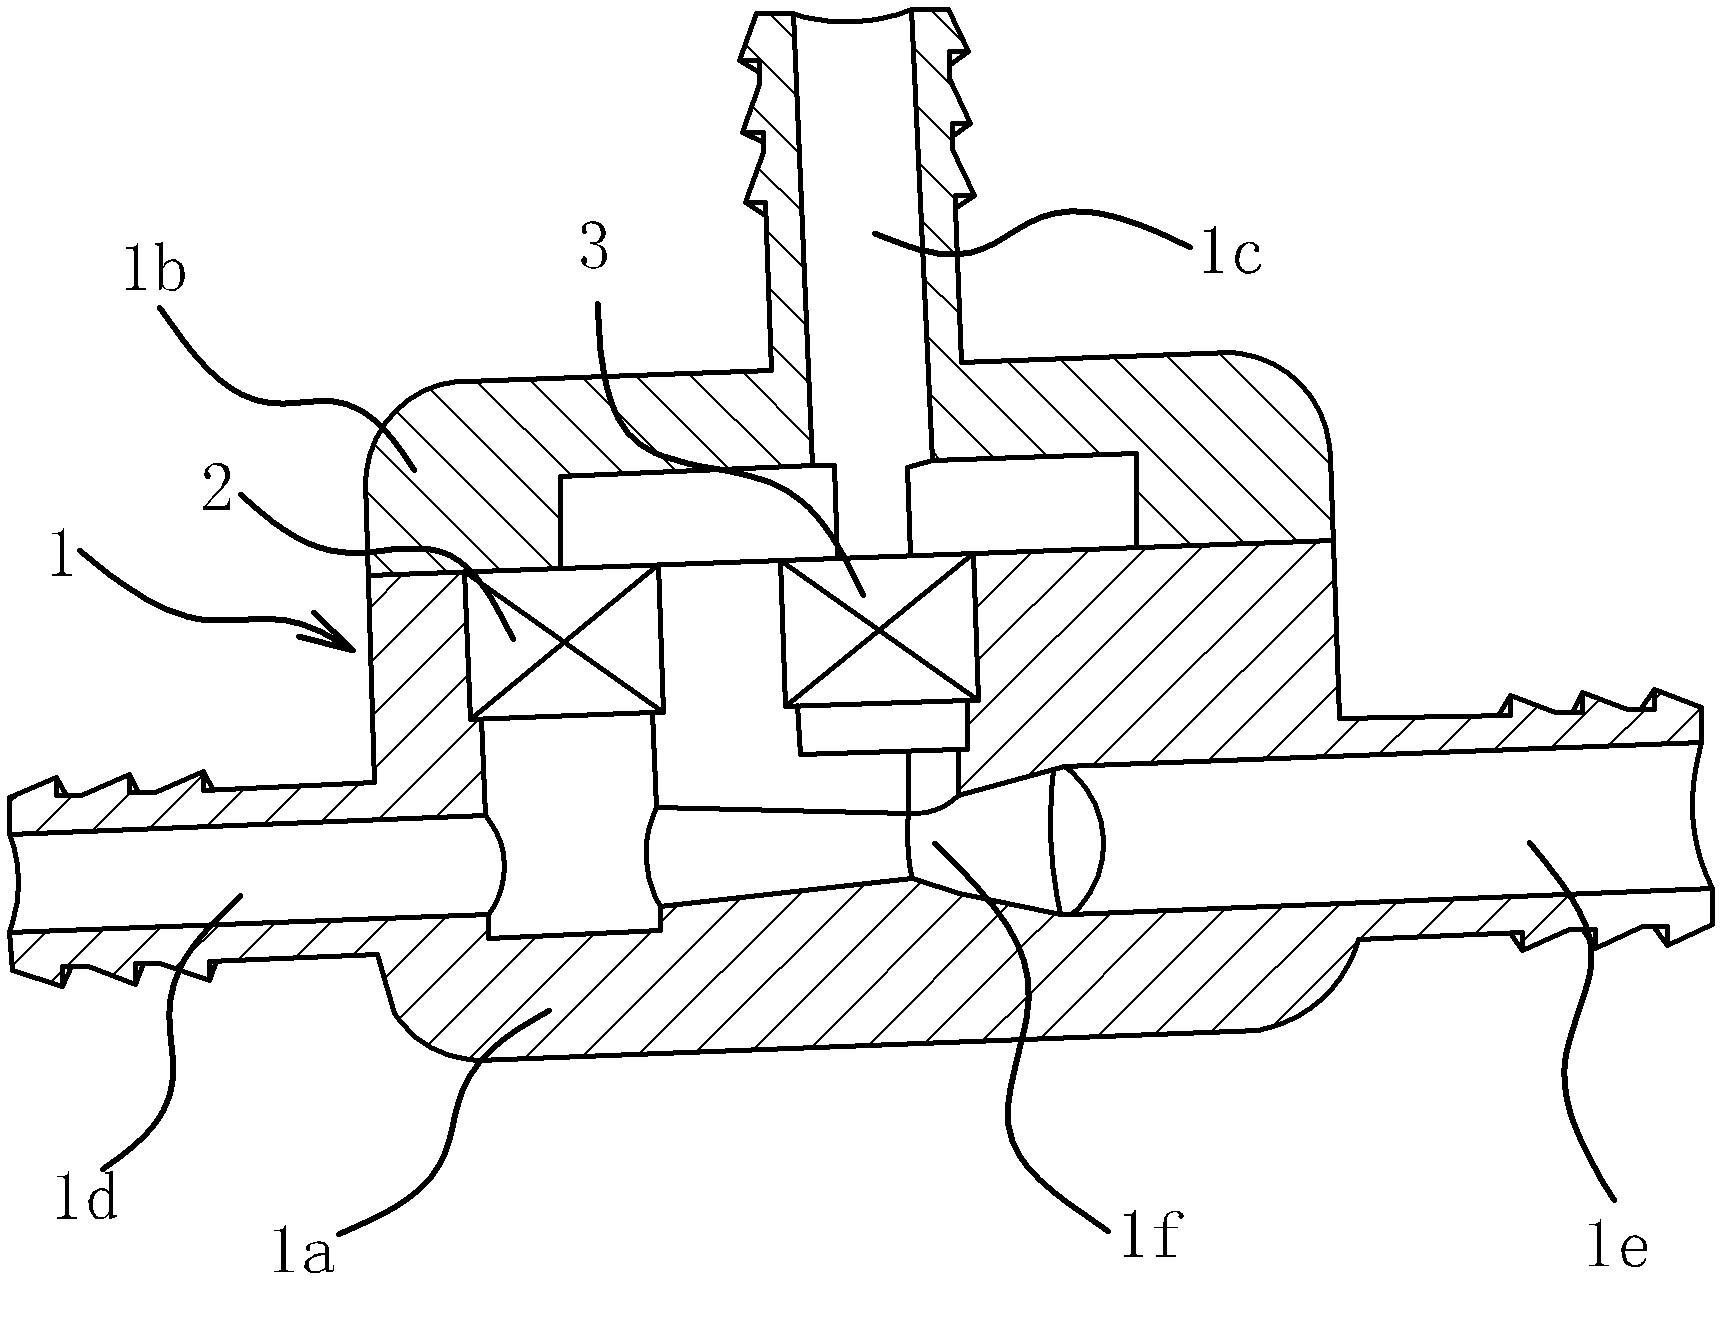 Carbon tank three-way connecting device and connecting structure thereof in supercharged gasoline motor car